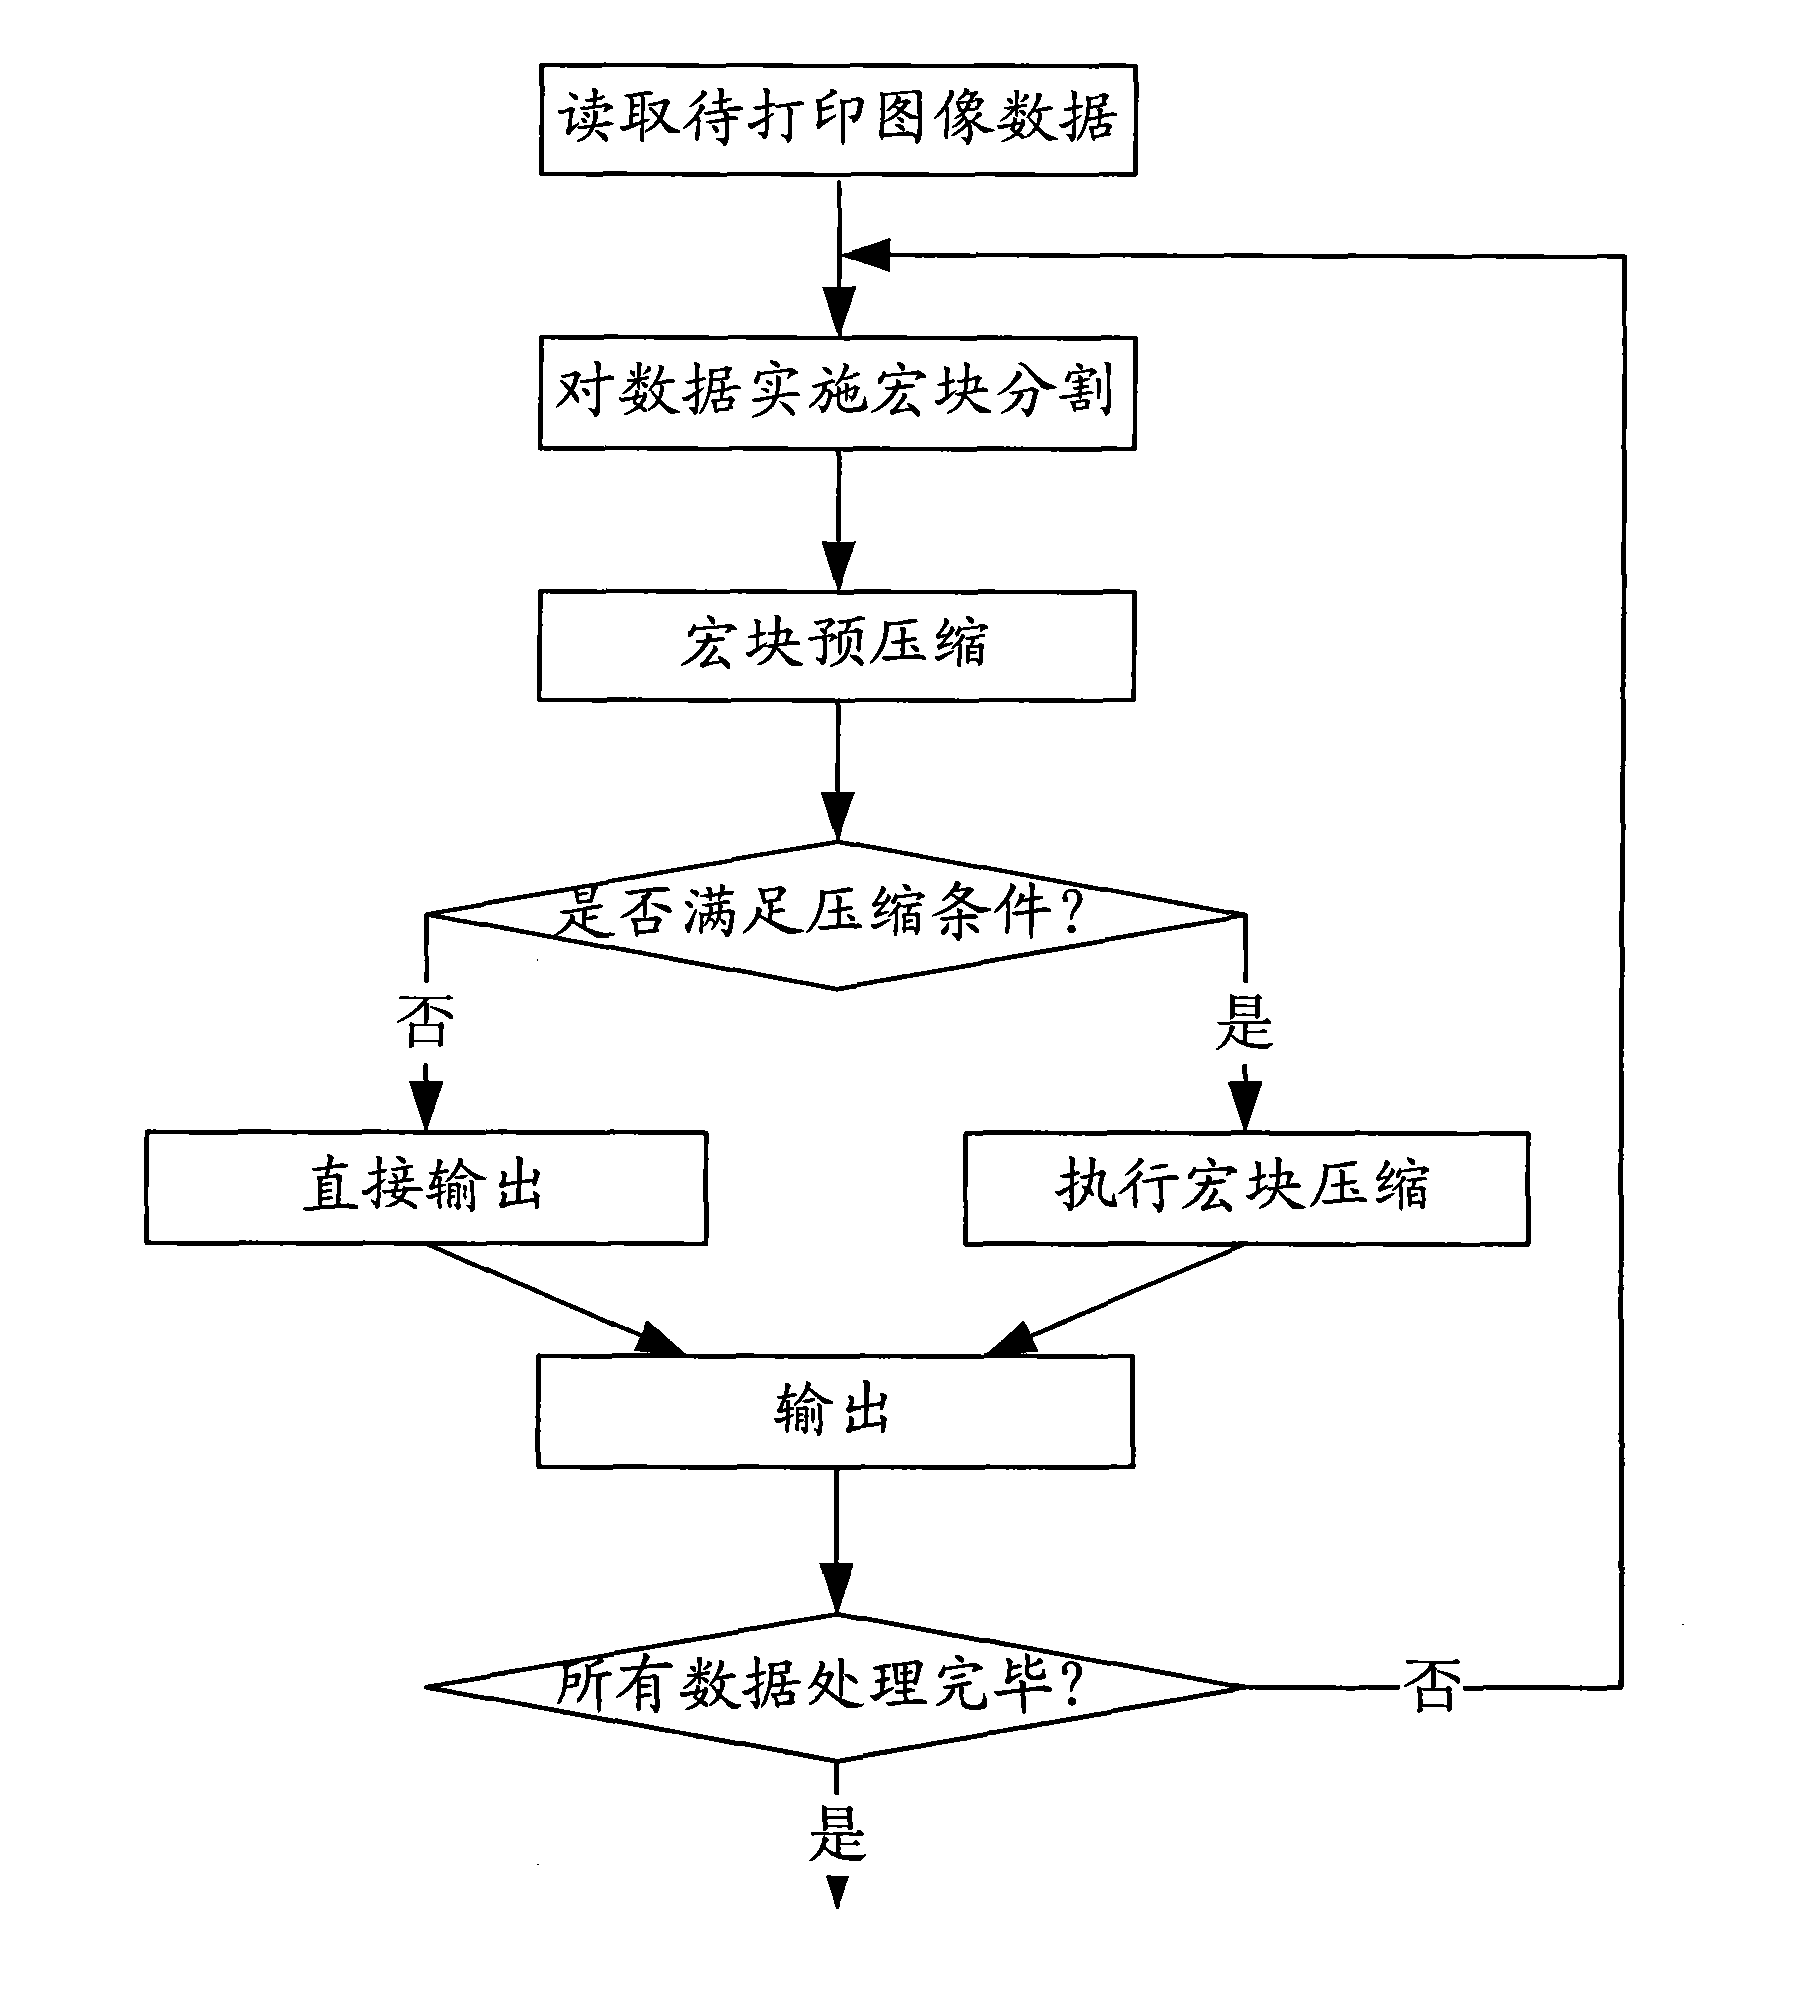 Stroke compression method and device based on RLE principle